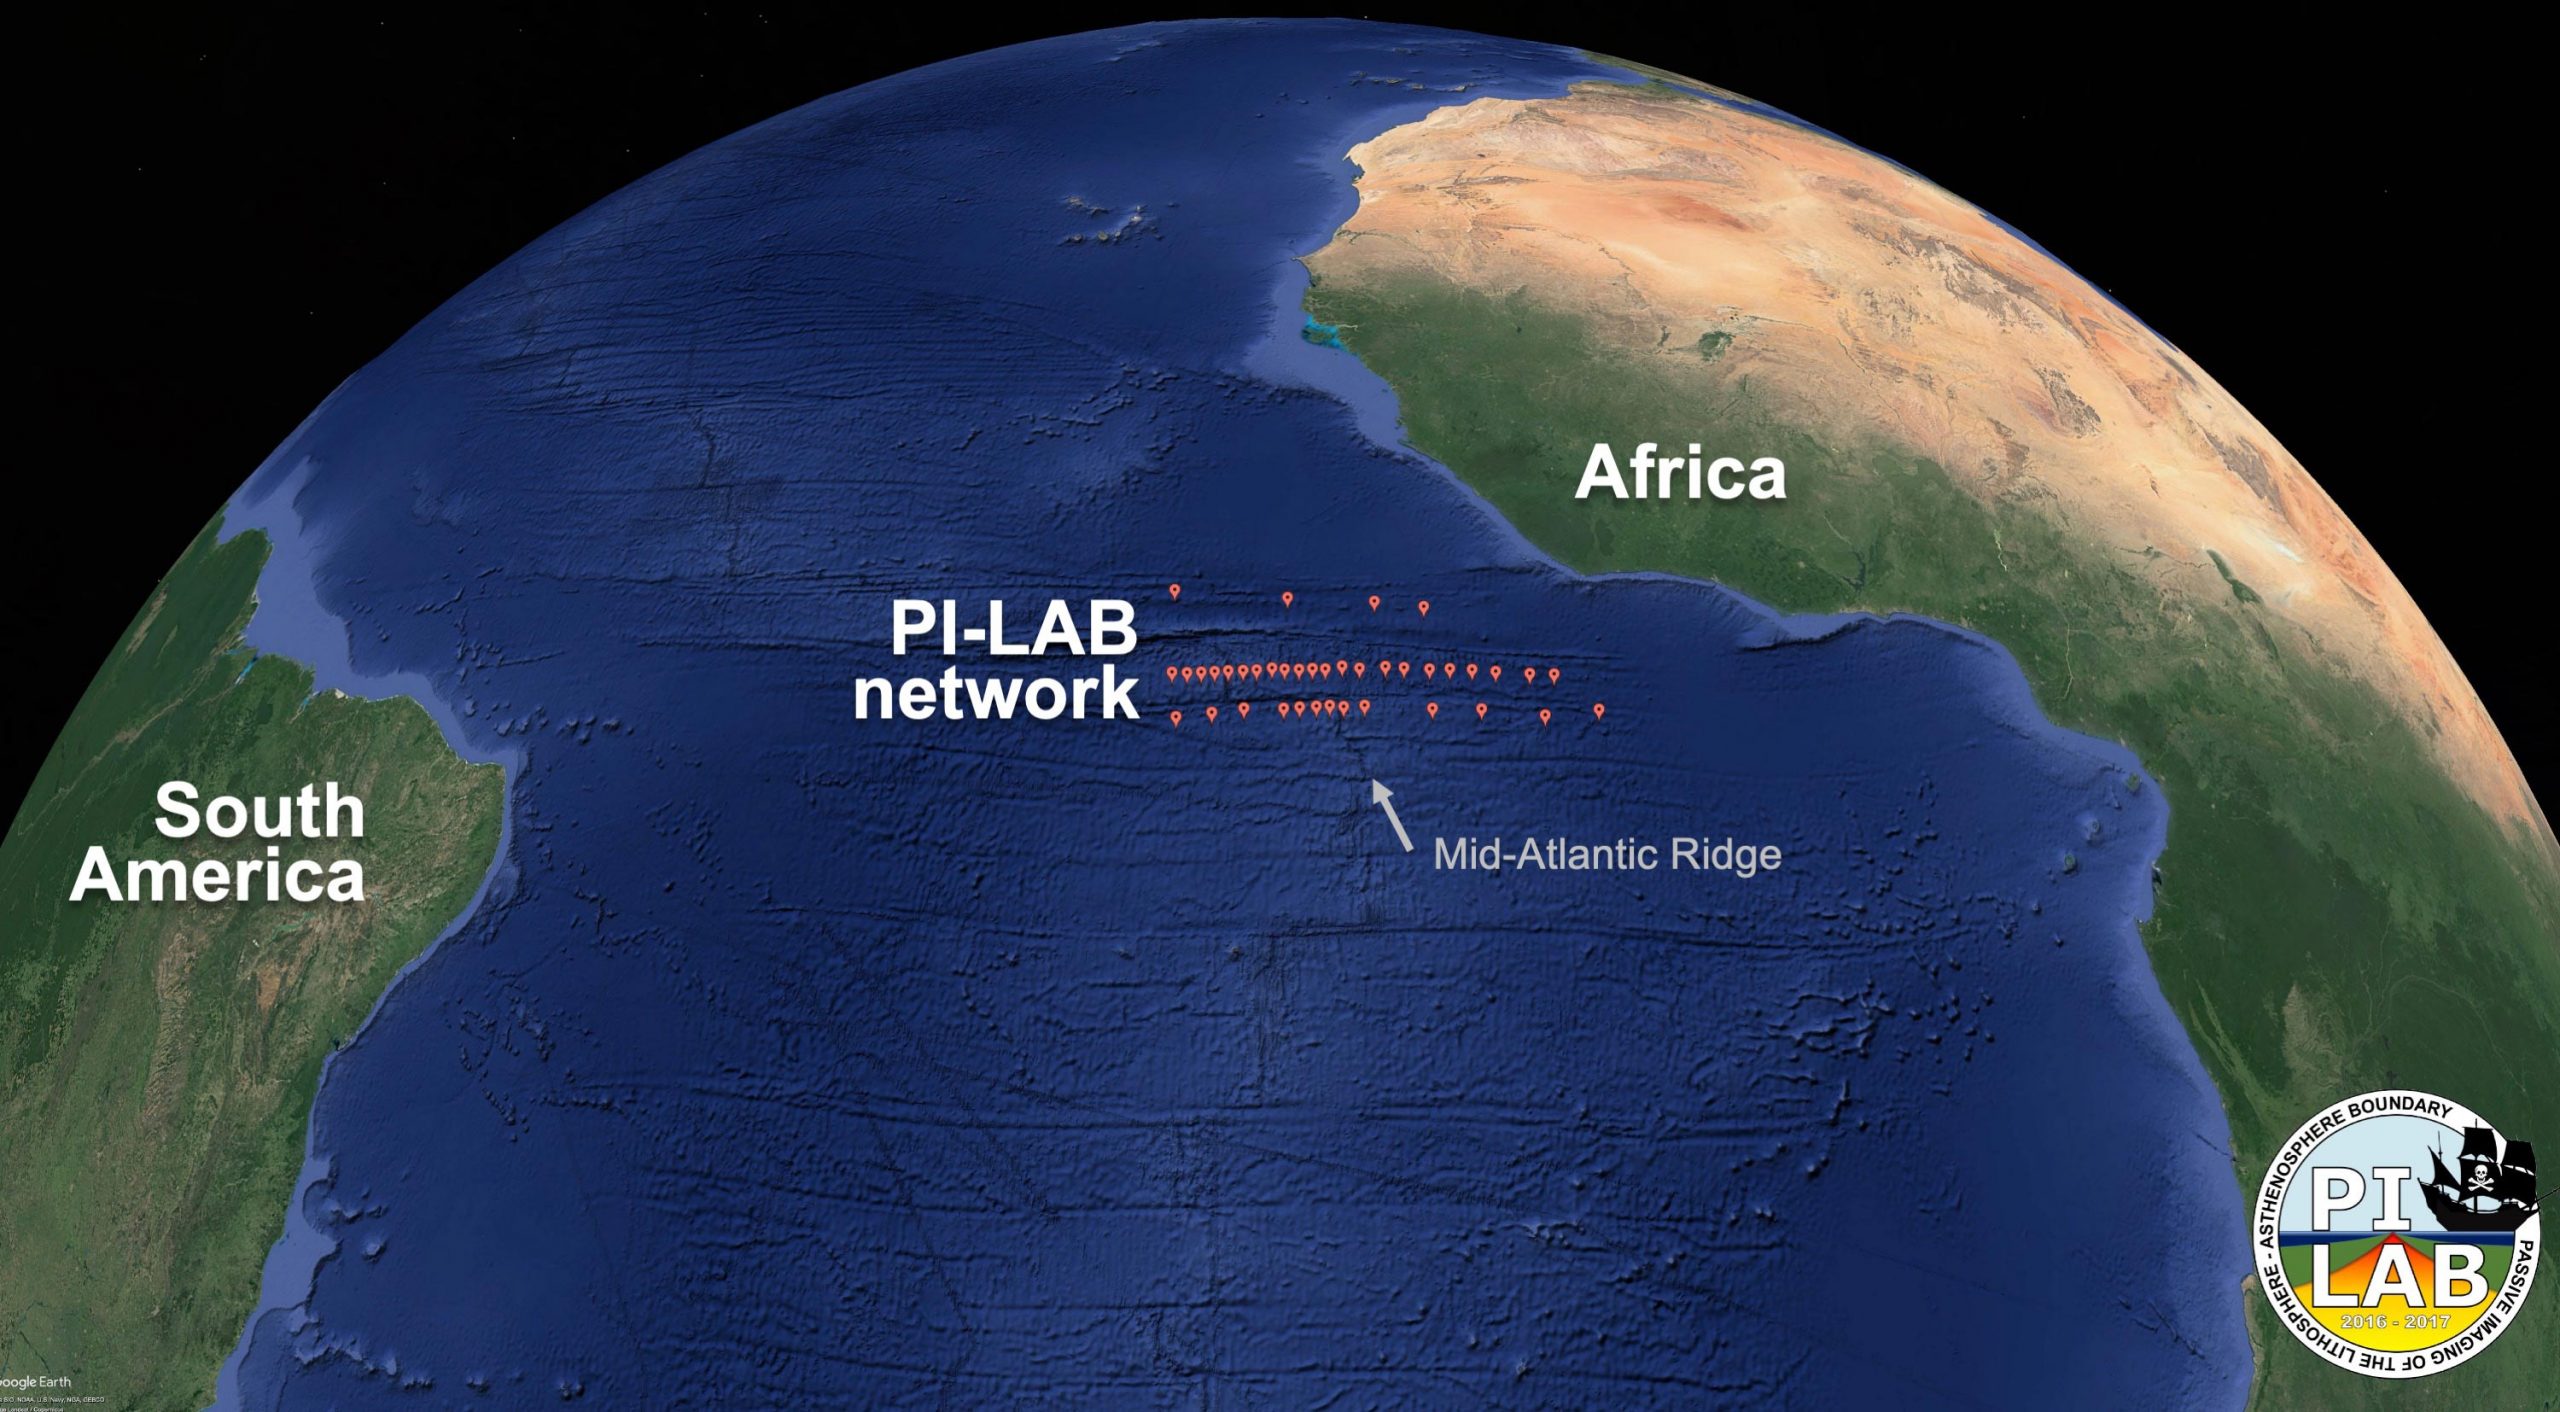 The Atlantic ocean is widening the continents further apart and